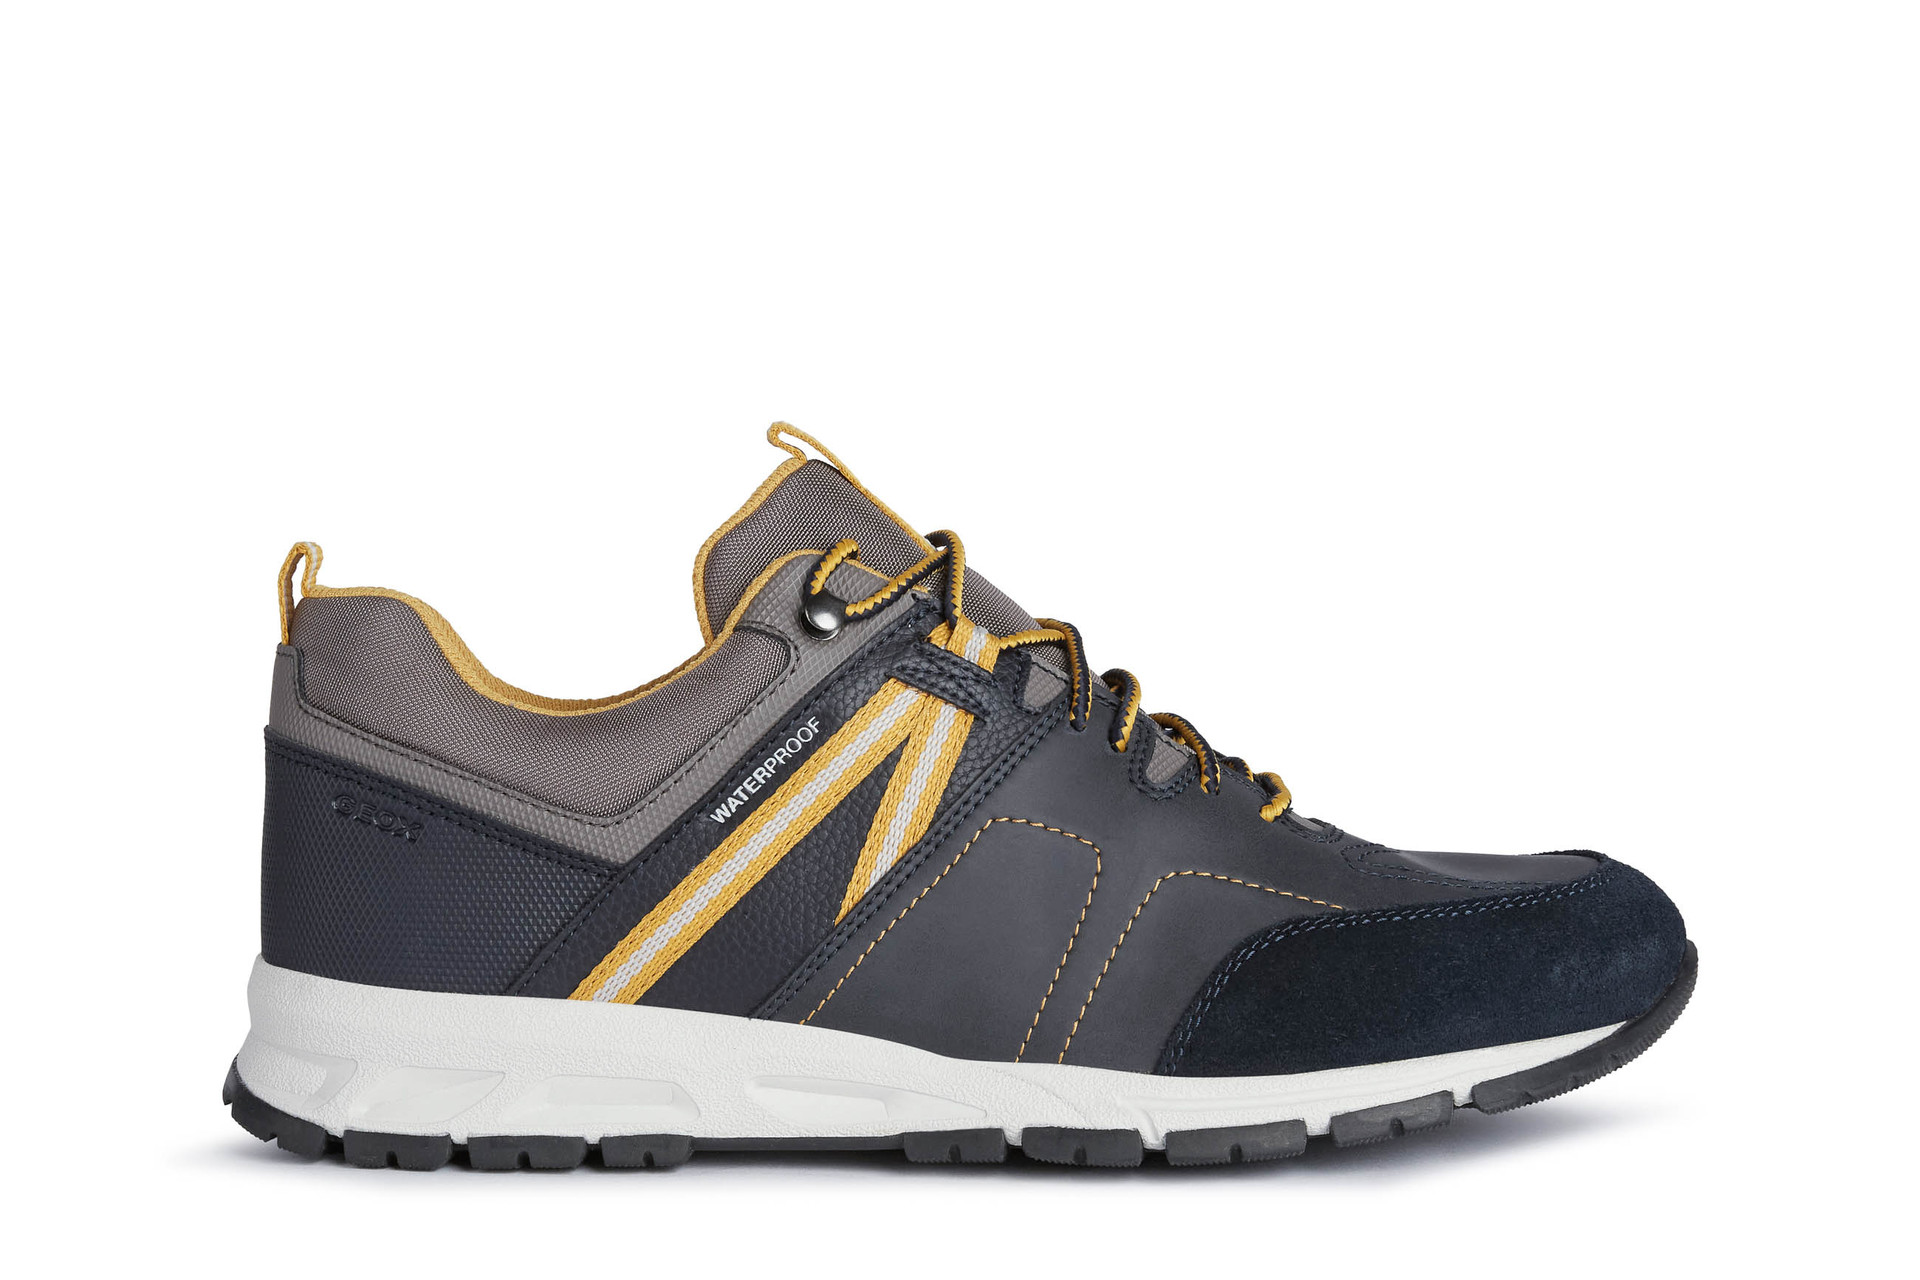 Delray B - Navy / Grey Leather/Synthetic